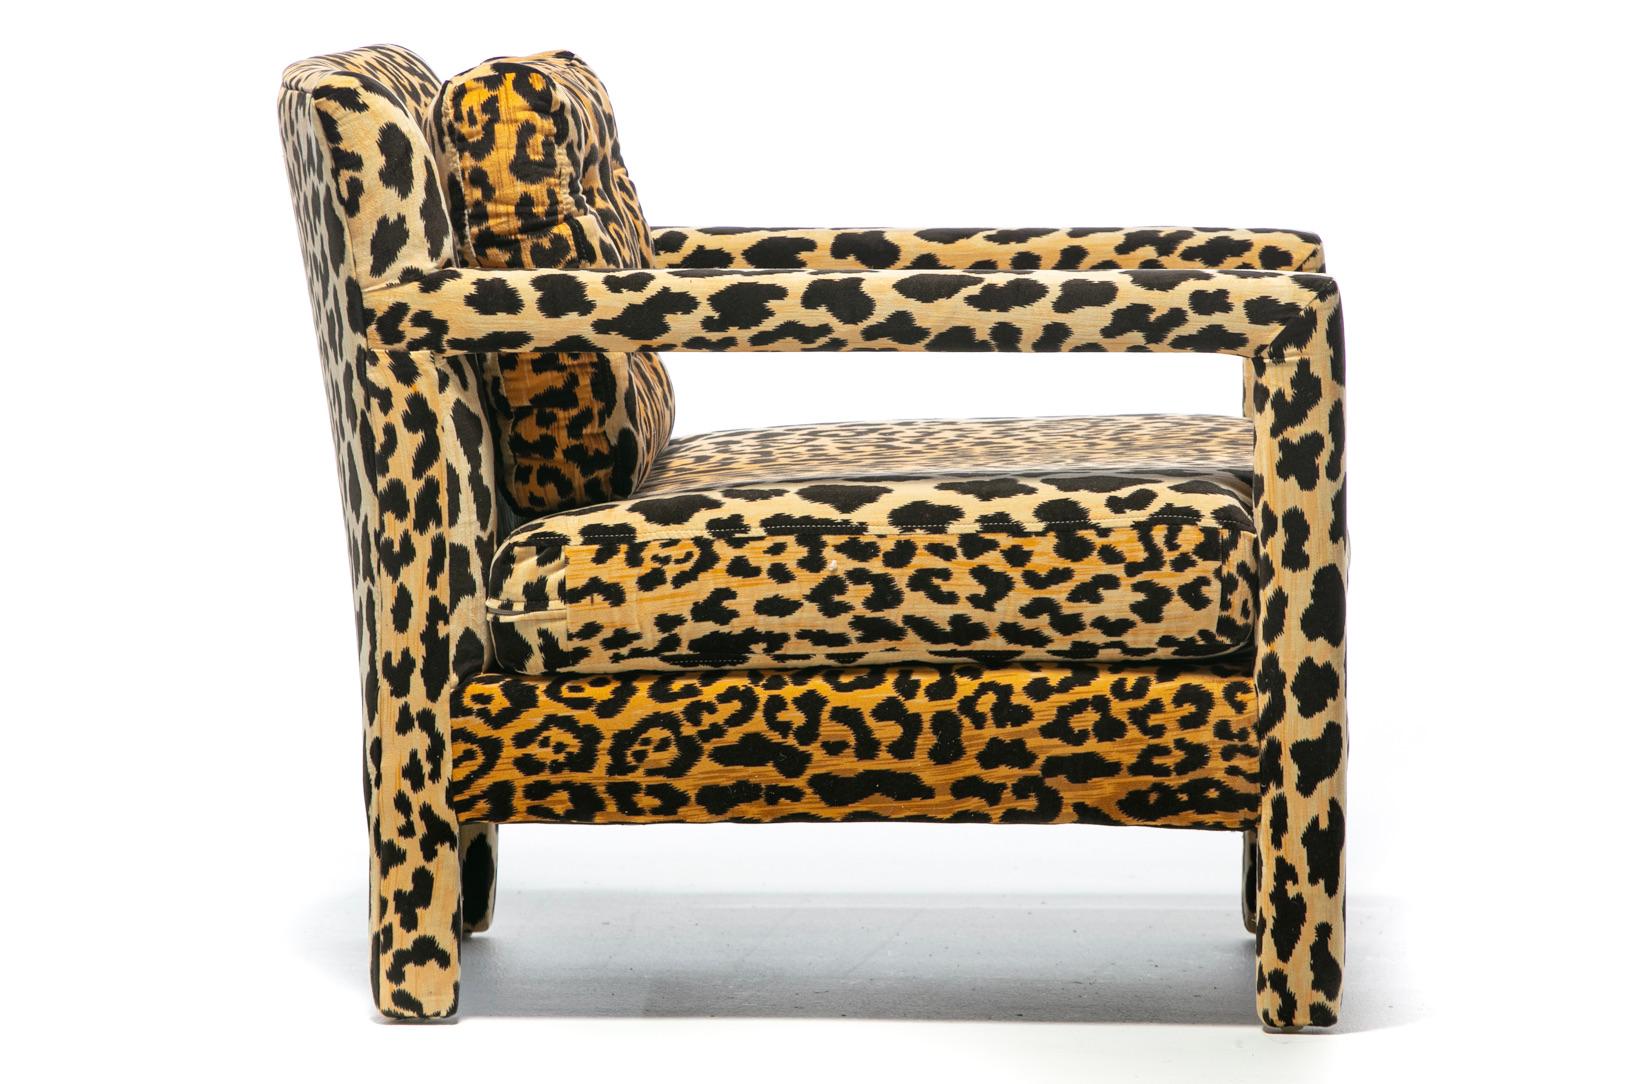 Pair of Milo Baughman Style Mid Century Parsons Chairs in Leopard Velvet c. 1970 For Sale 3